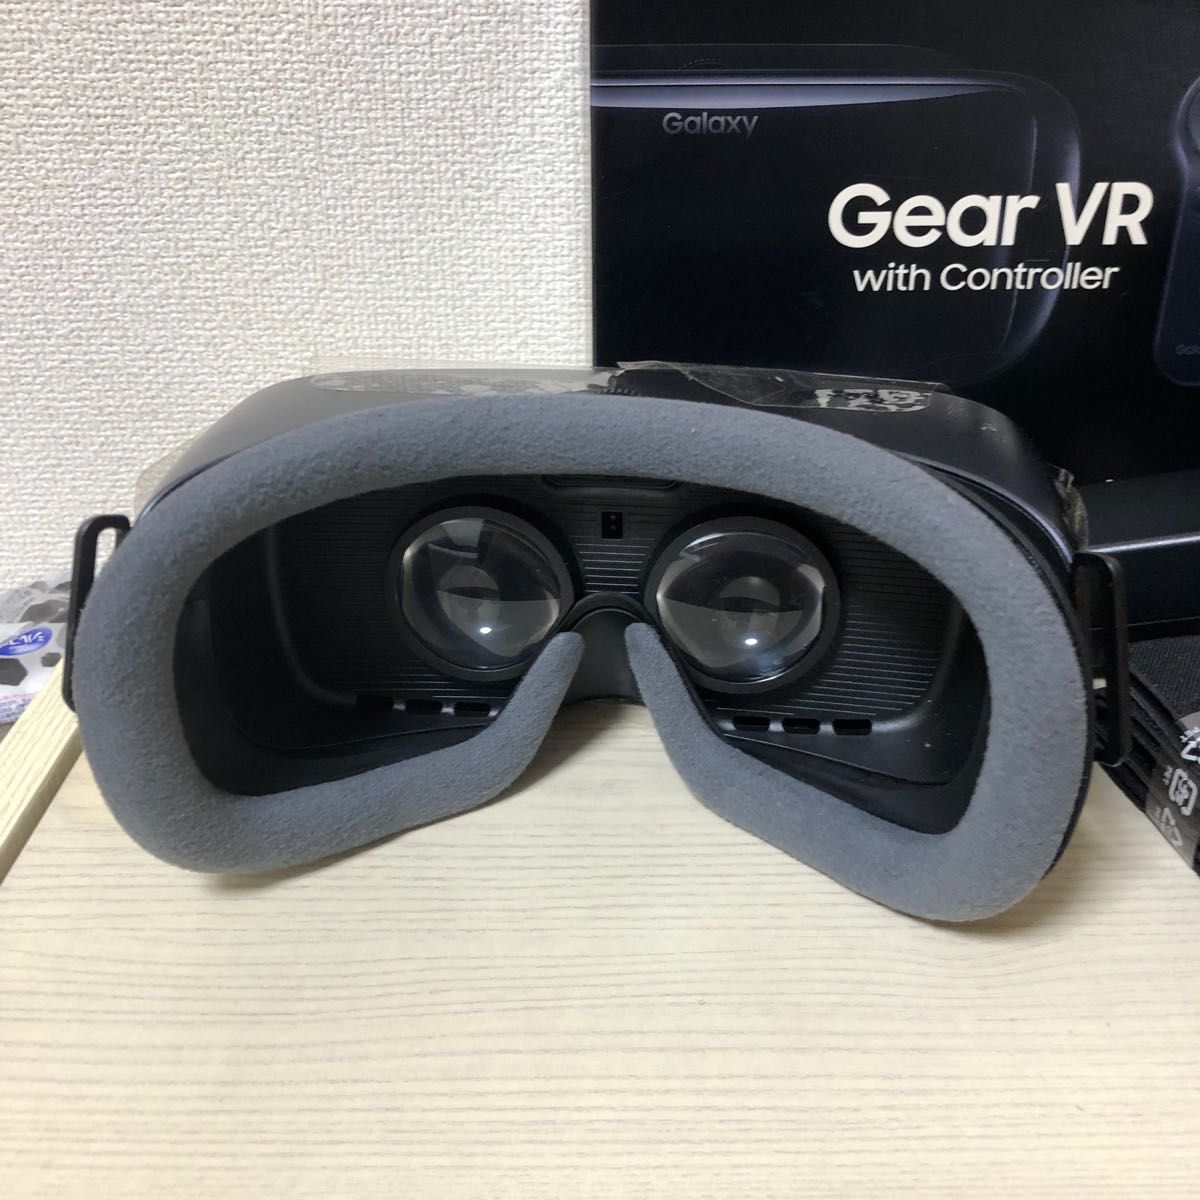 SAMSUNG 専用コントローラー付属 Oculus VR Galaxy Gear VR with Controller